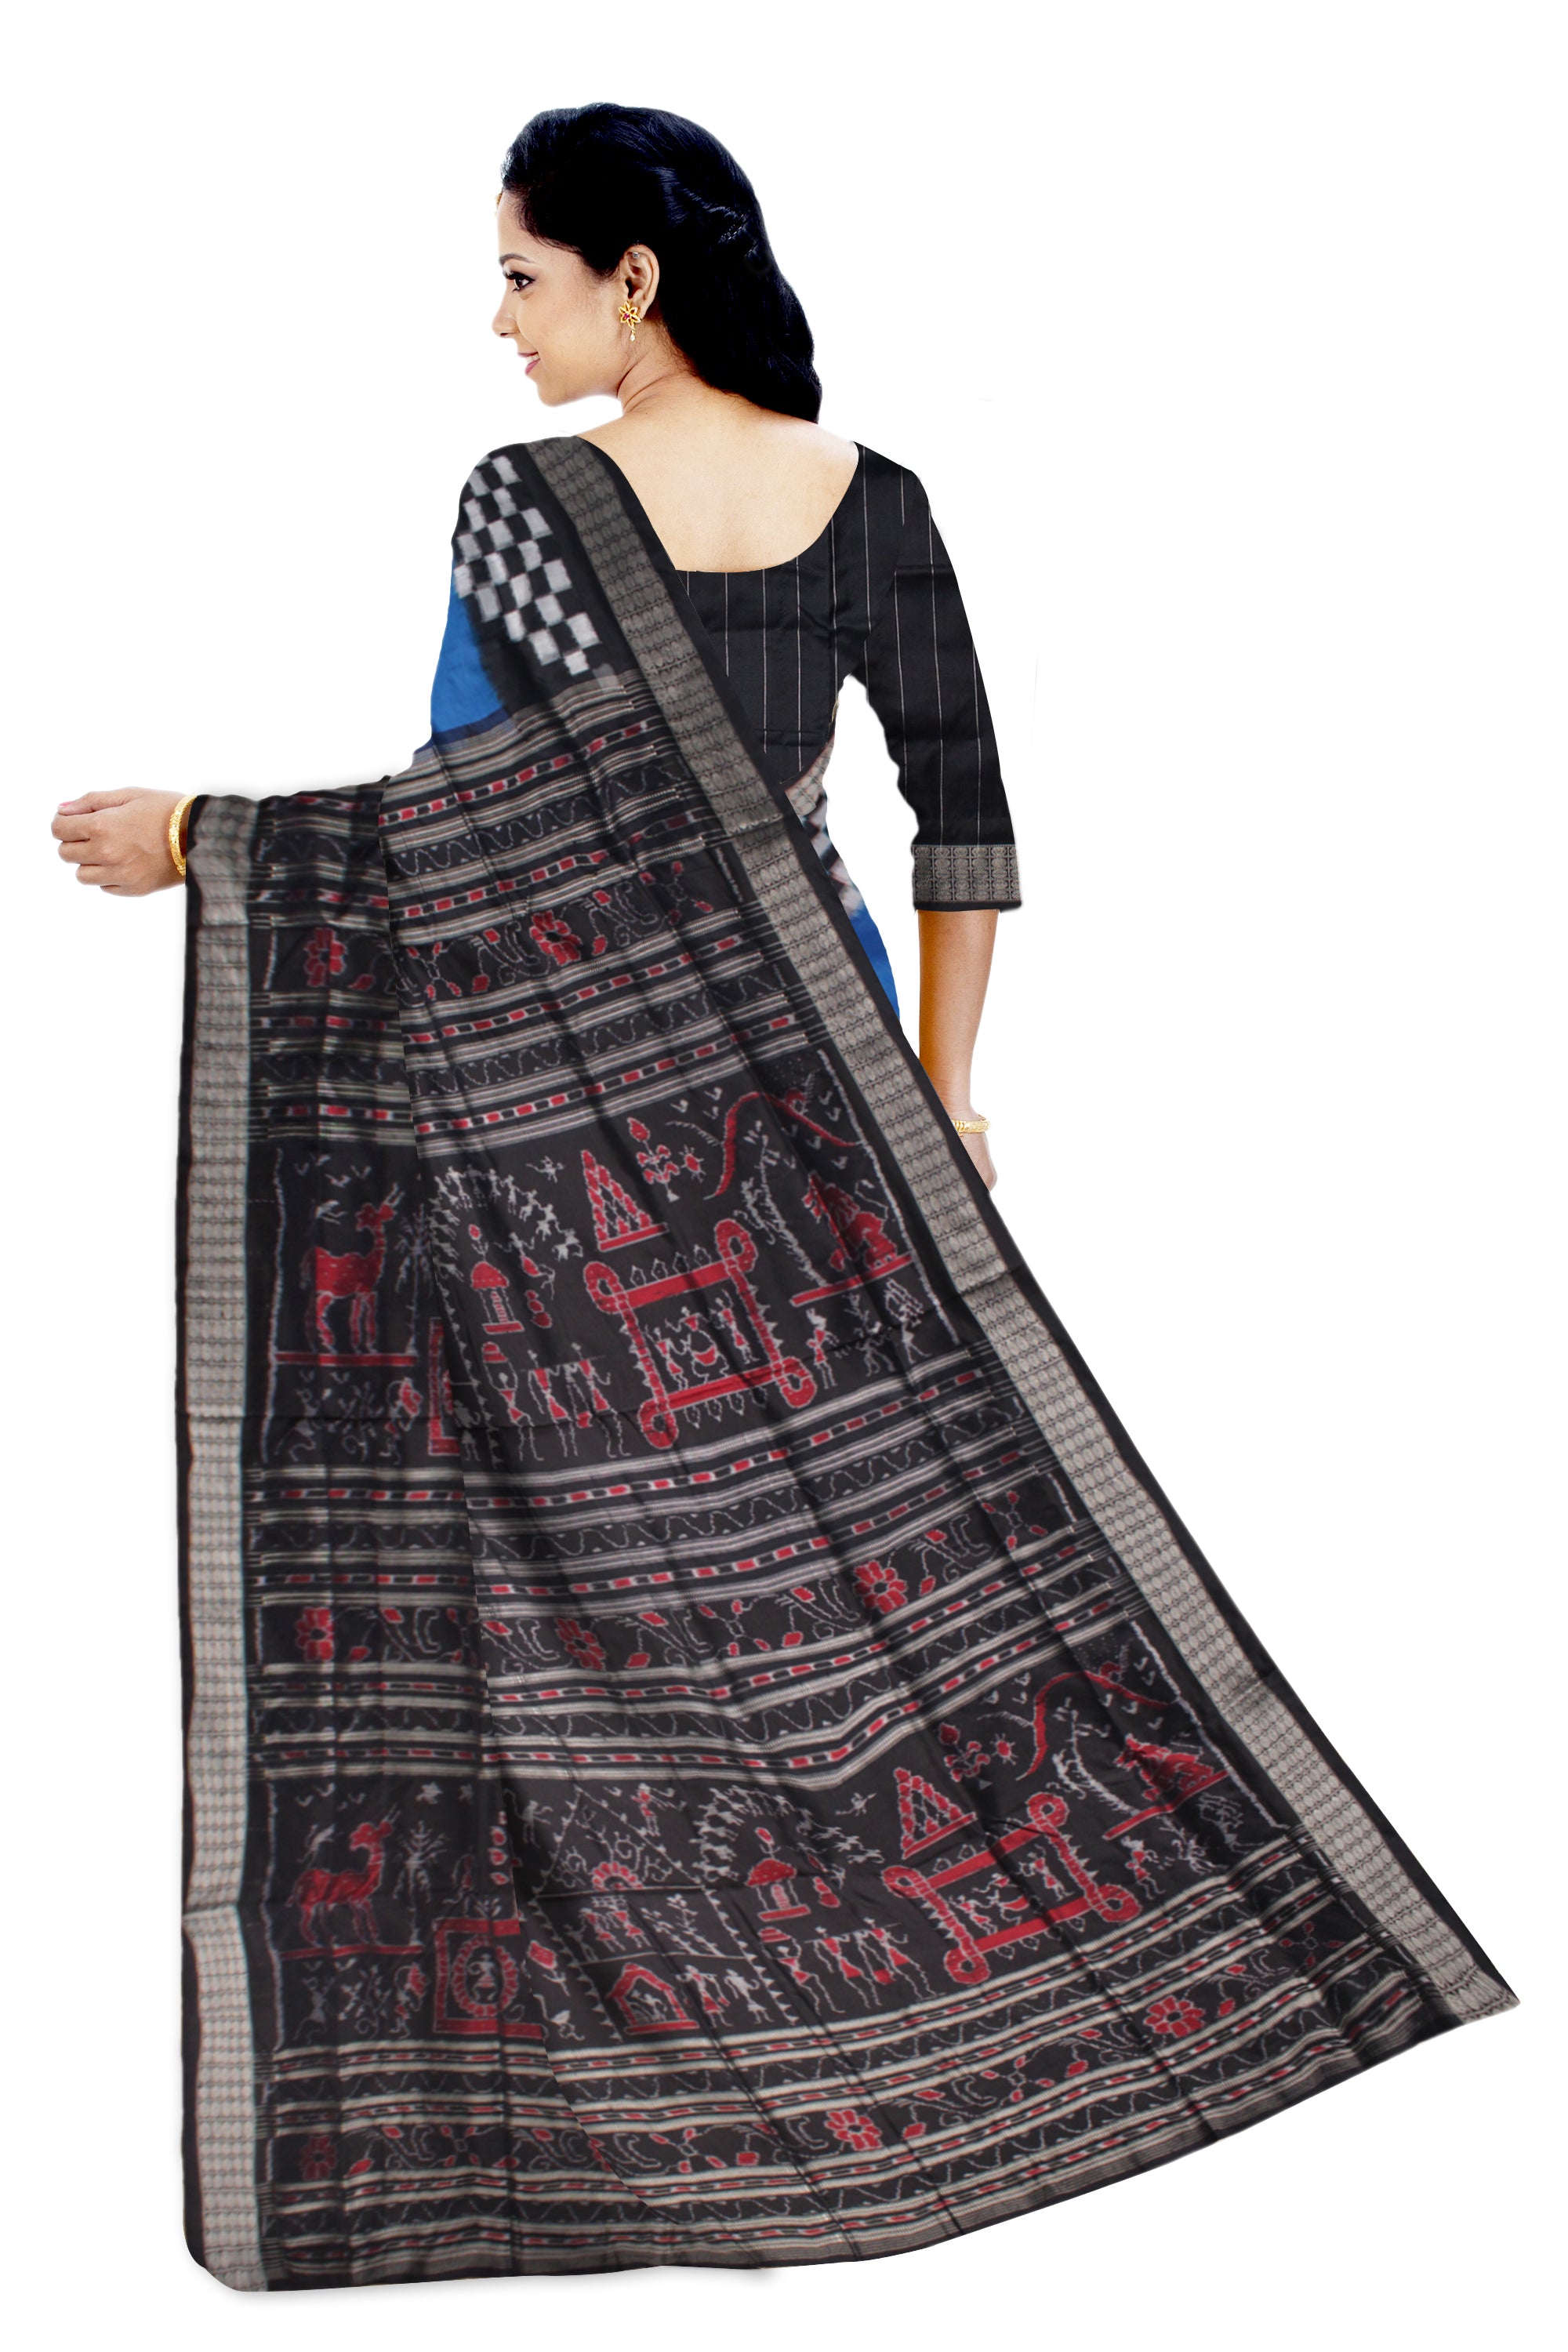 TRAIDITIONAL TERRACOTTA PATTERN PALLU WITH BORDER PASAPALI PATTERN PURE SILK SAREE IS BLUE AND BLACK COLOR BASE,WITH BLOUSE PIECE. - Koshali Arts & Crafts Enterprise